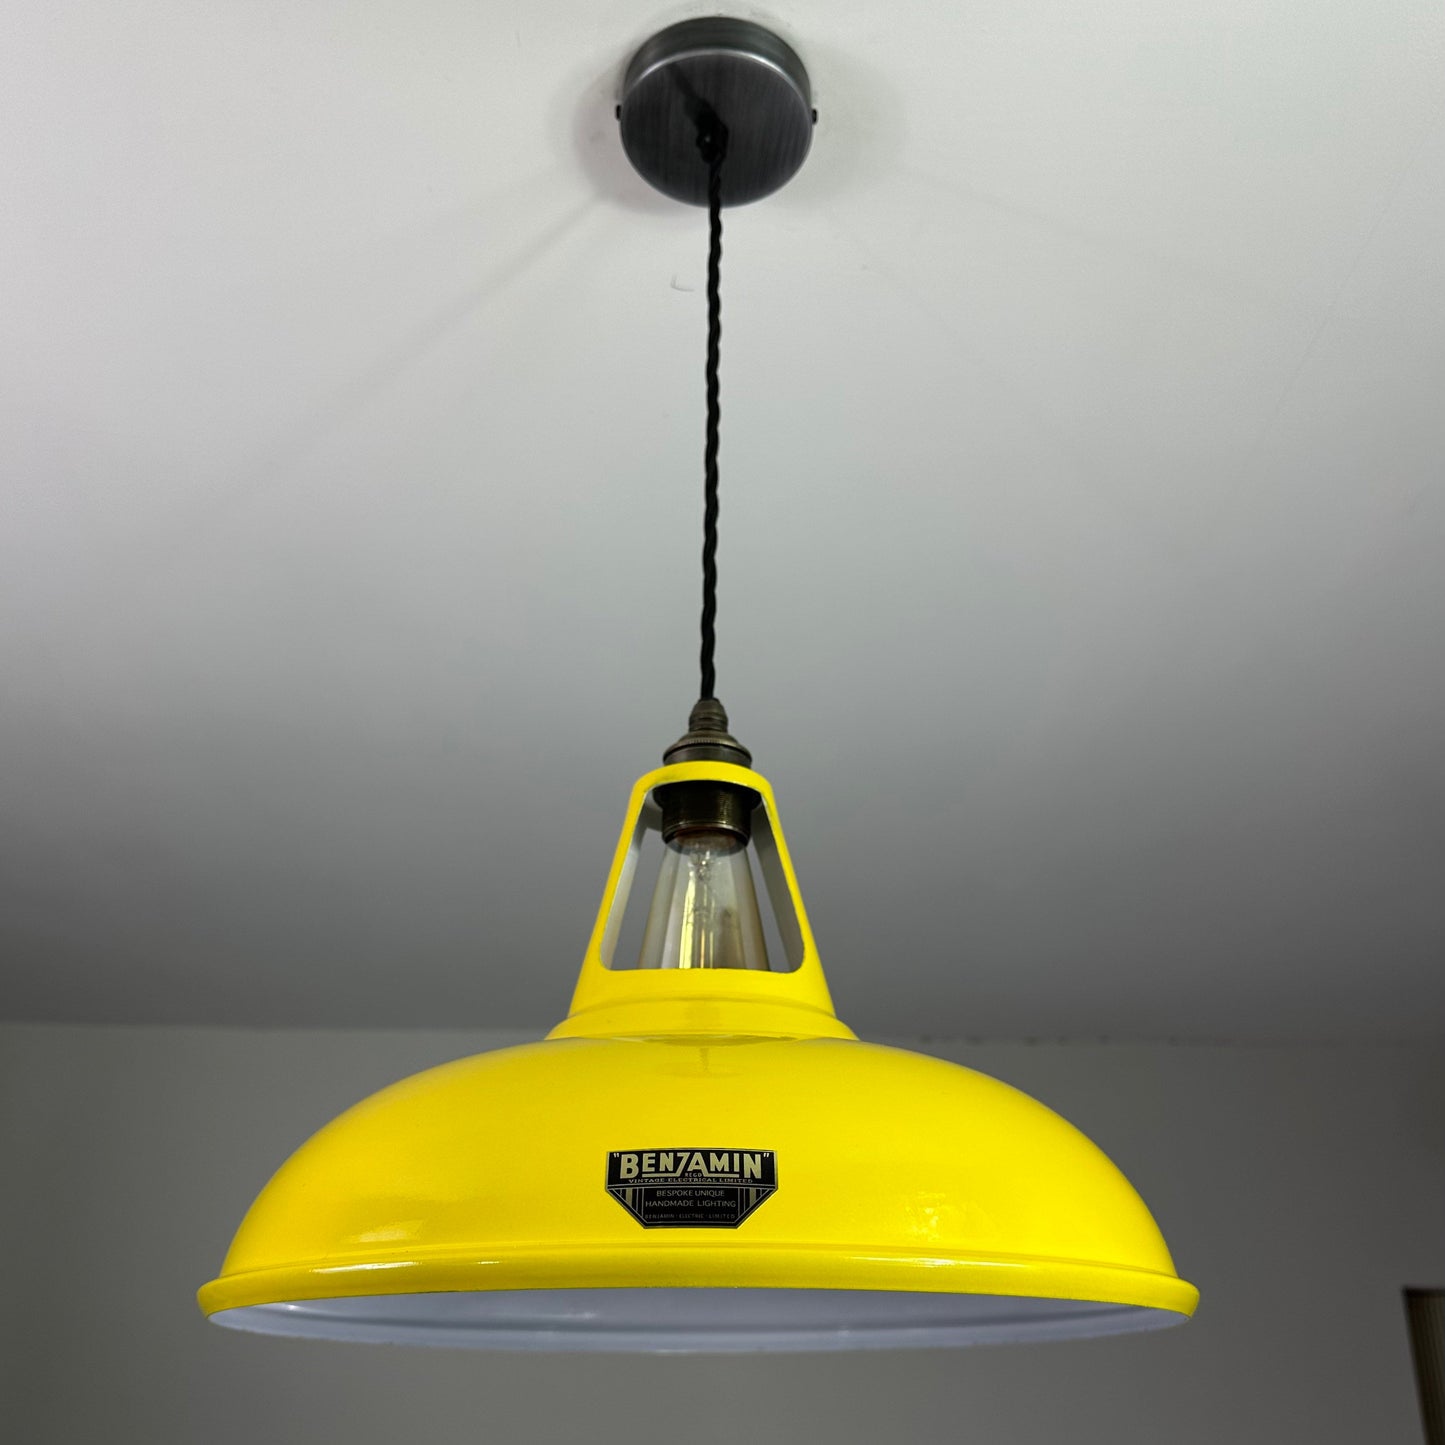 Cawston XL ~ Yellow Solid Shade Slotted Design Pendant Set Light | Ceiling Dining Room | Kitchen Table | Vintage Filament Bulb 14 Inch